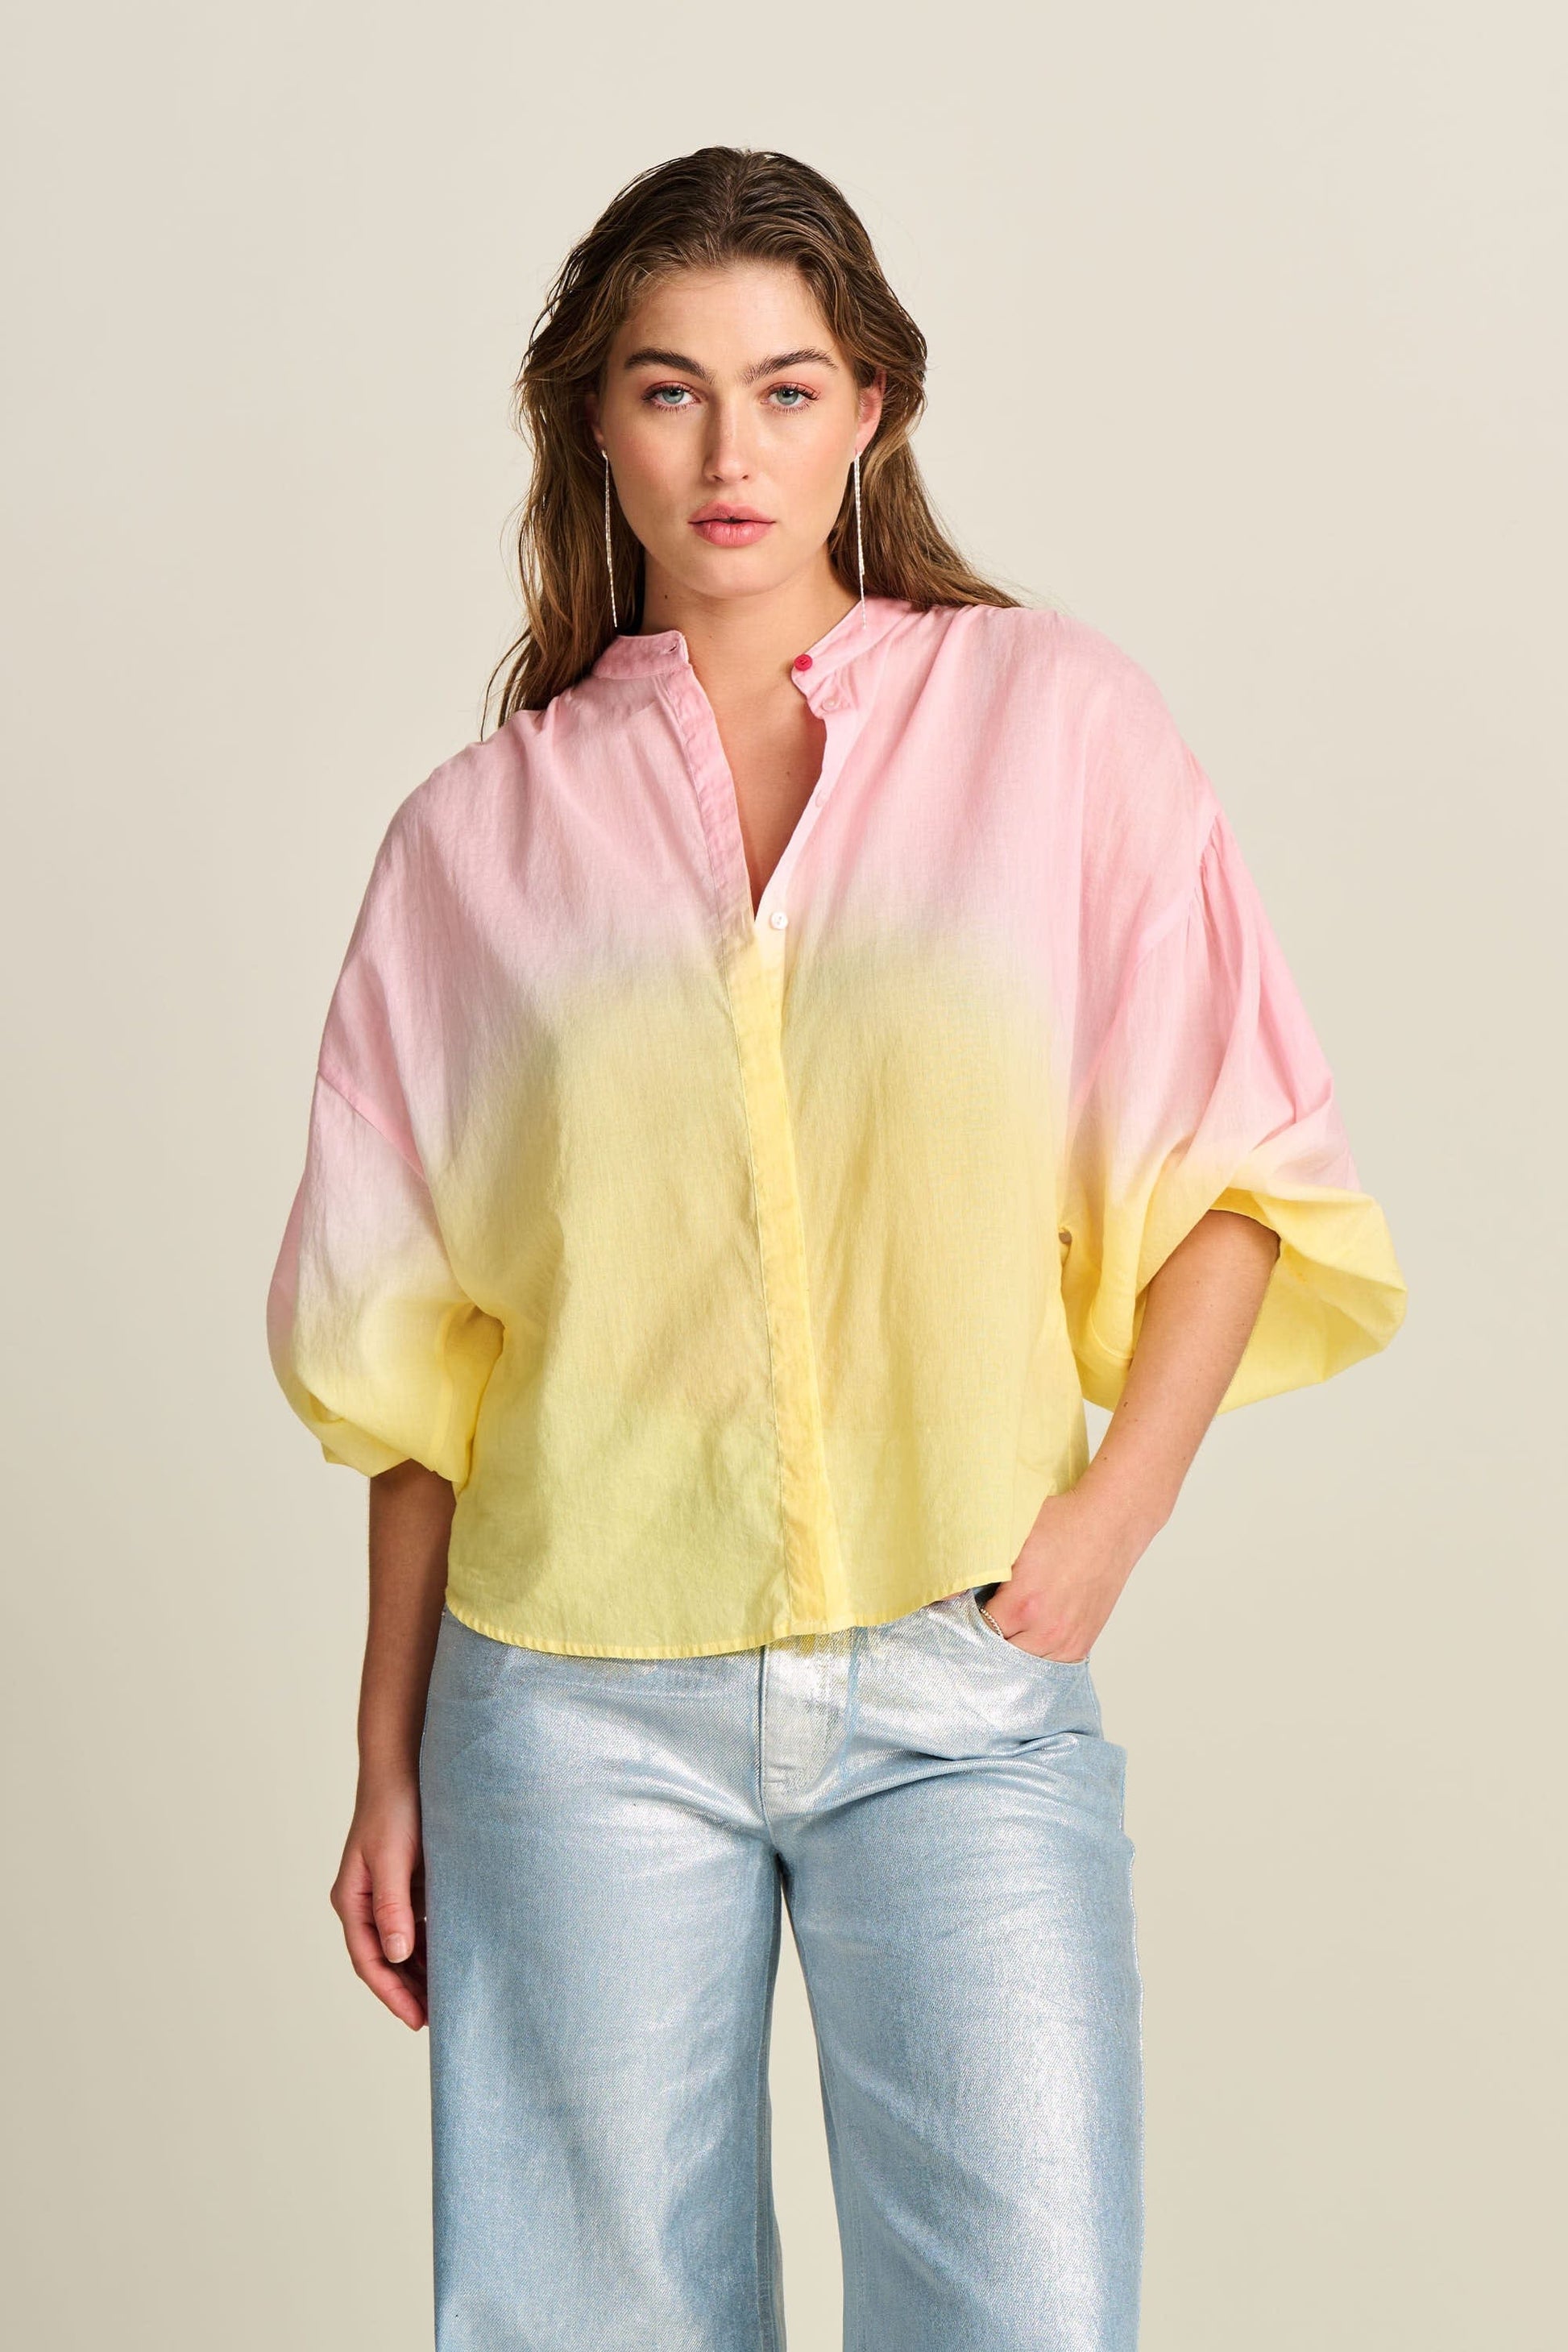 POM Amsterdam Blouses BLOUSE - Faded Blooming Pink